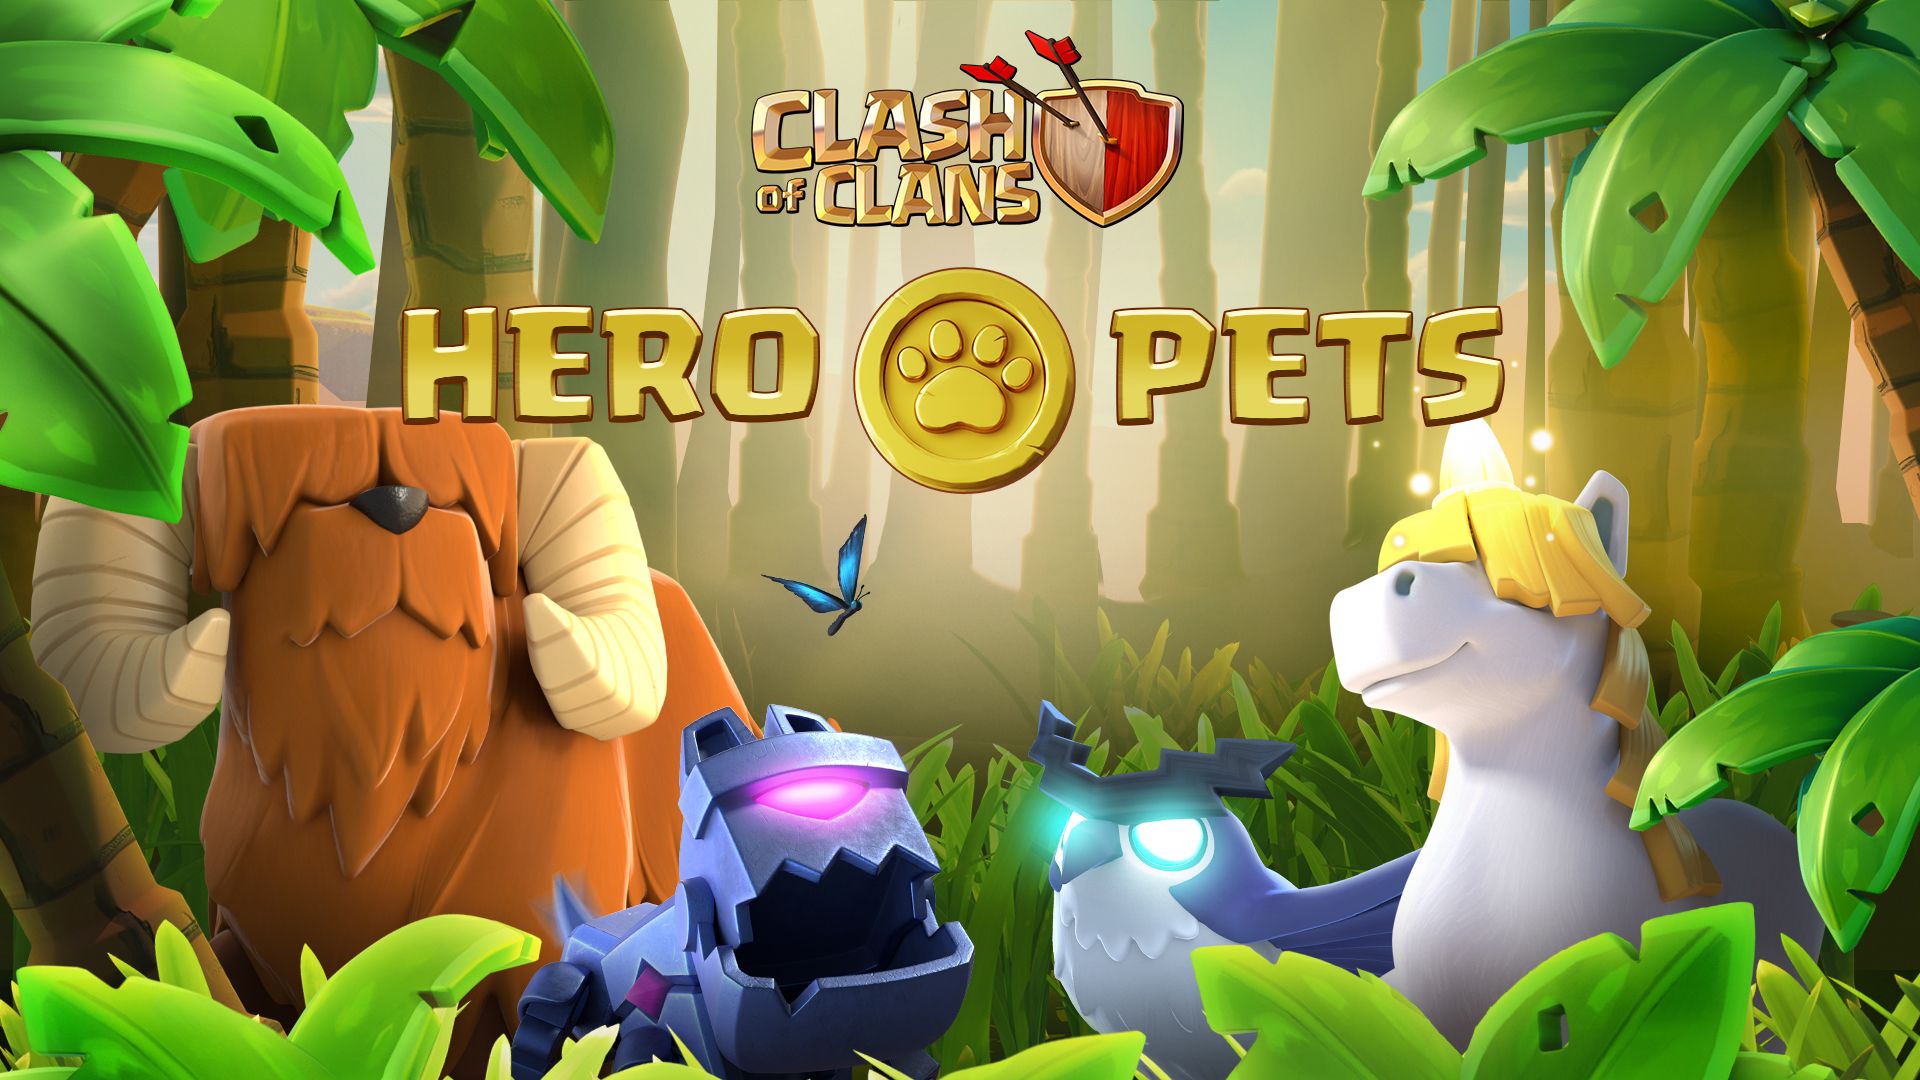 Meet The Hero Pets!. Clash of Clans